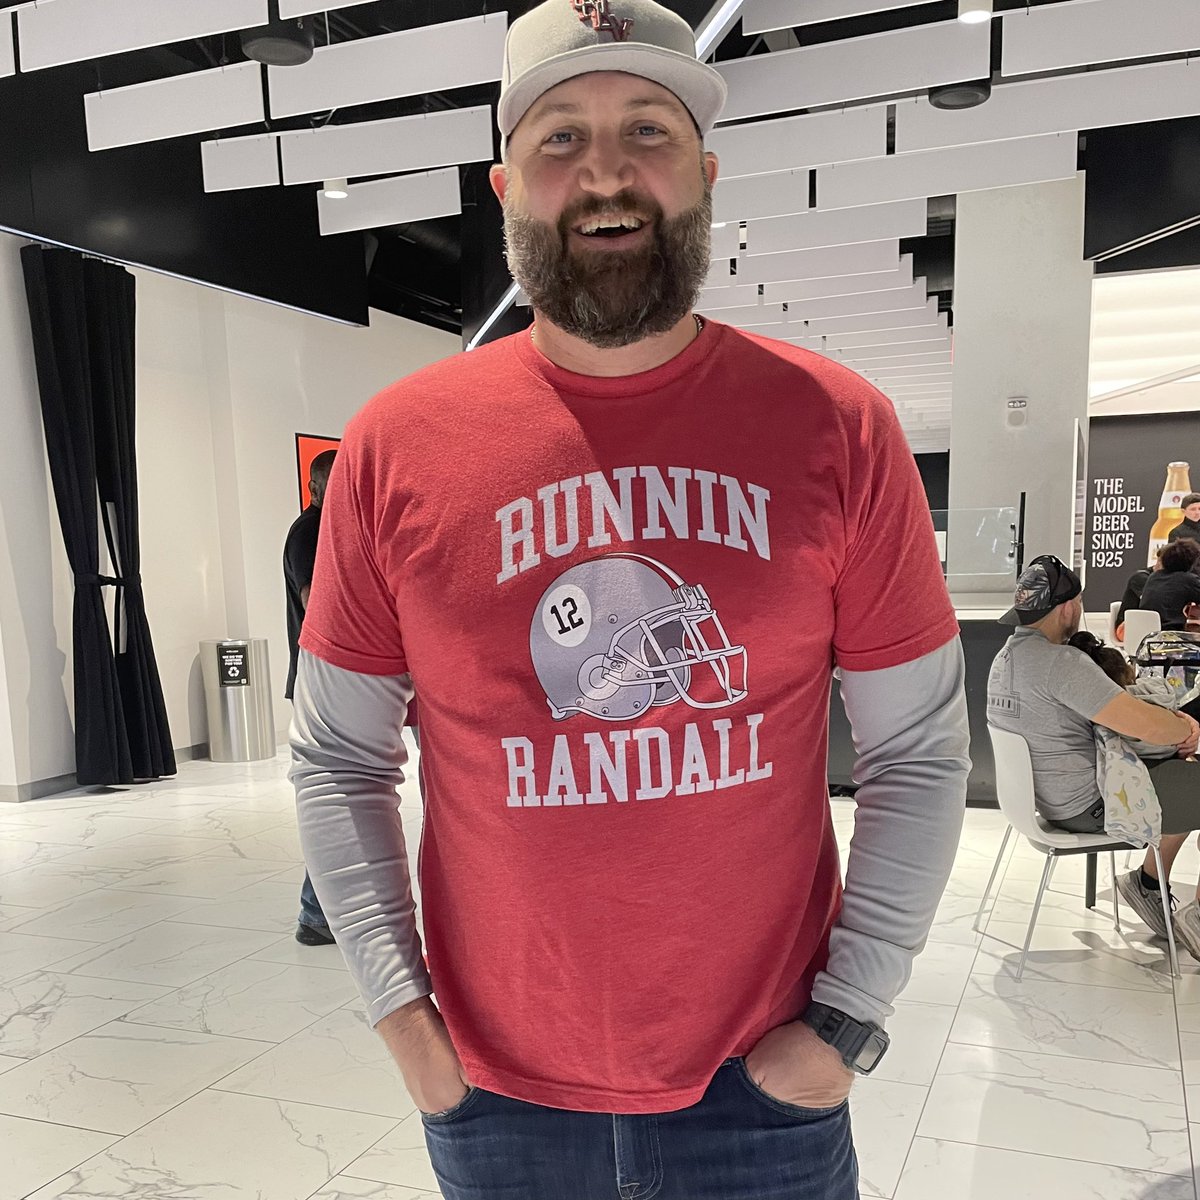 Always cool to see designs out in the wild. Thank you @howardLV for supporting the past and present of UNLV Football and rocking a Rebel legend.